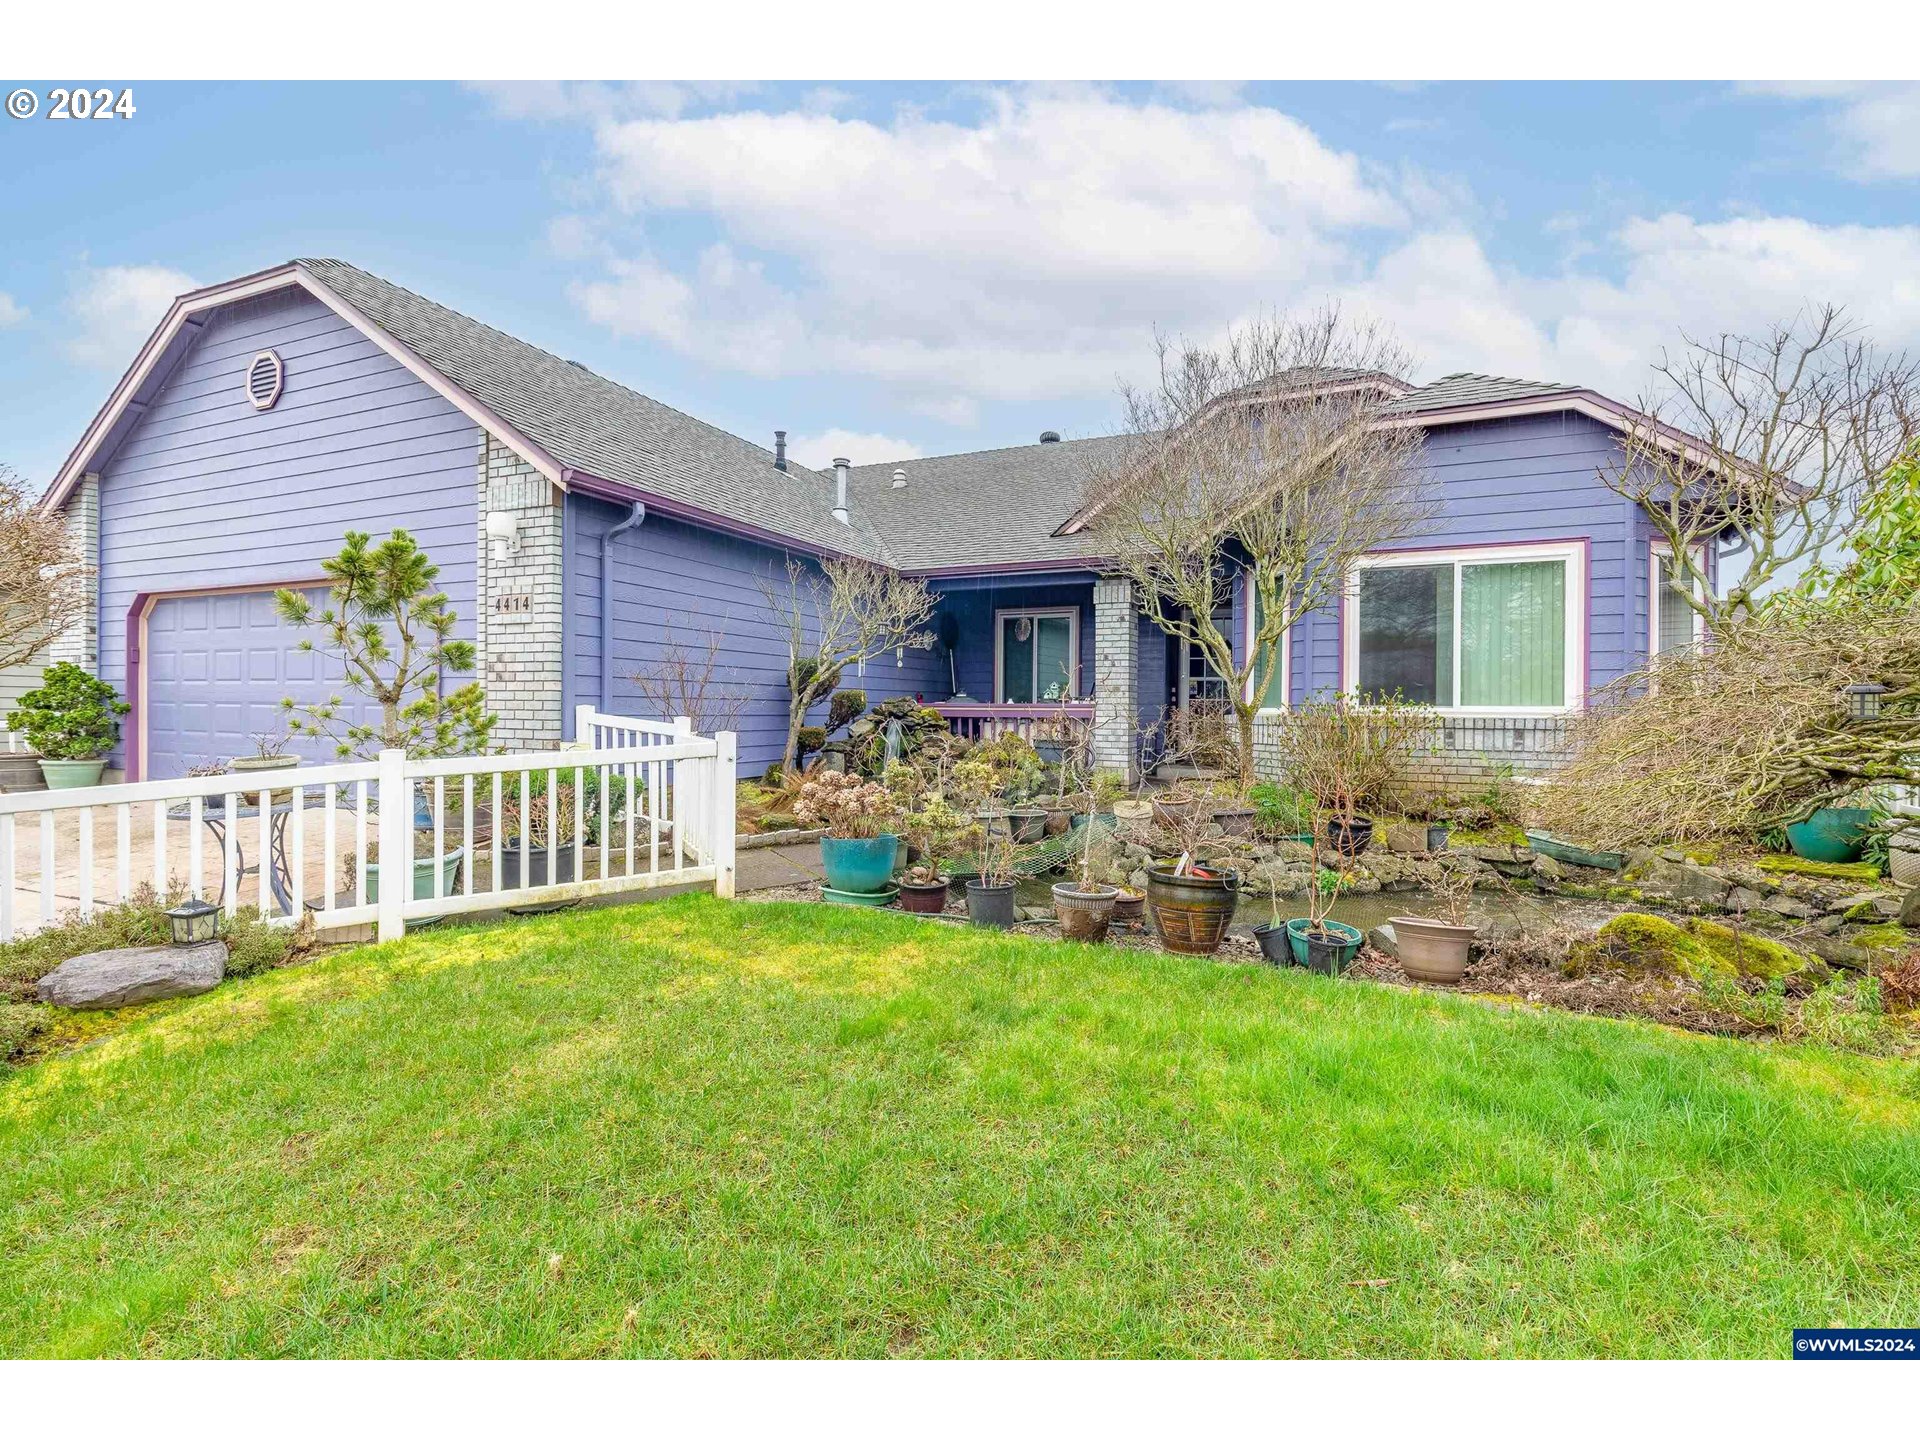 4414 INDIAN EARTH AVE, Salem, OR 